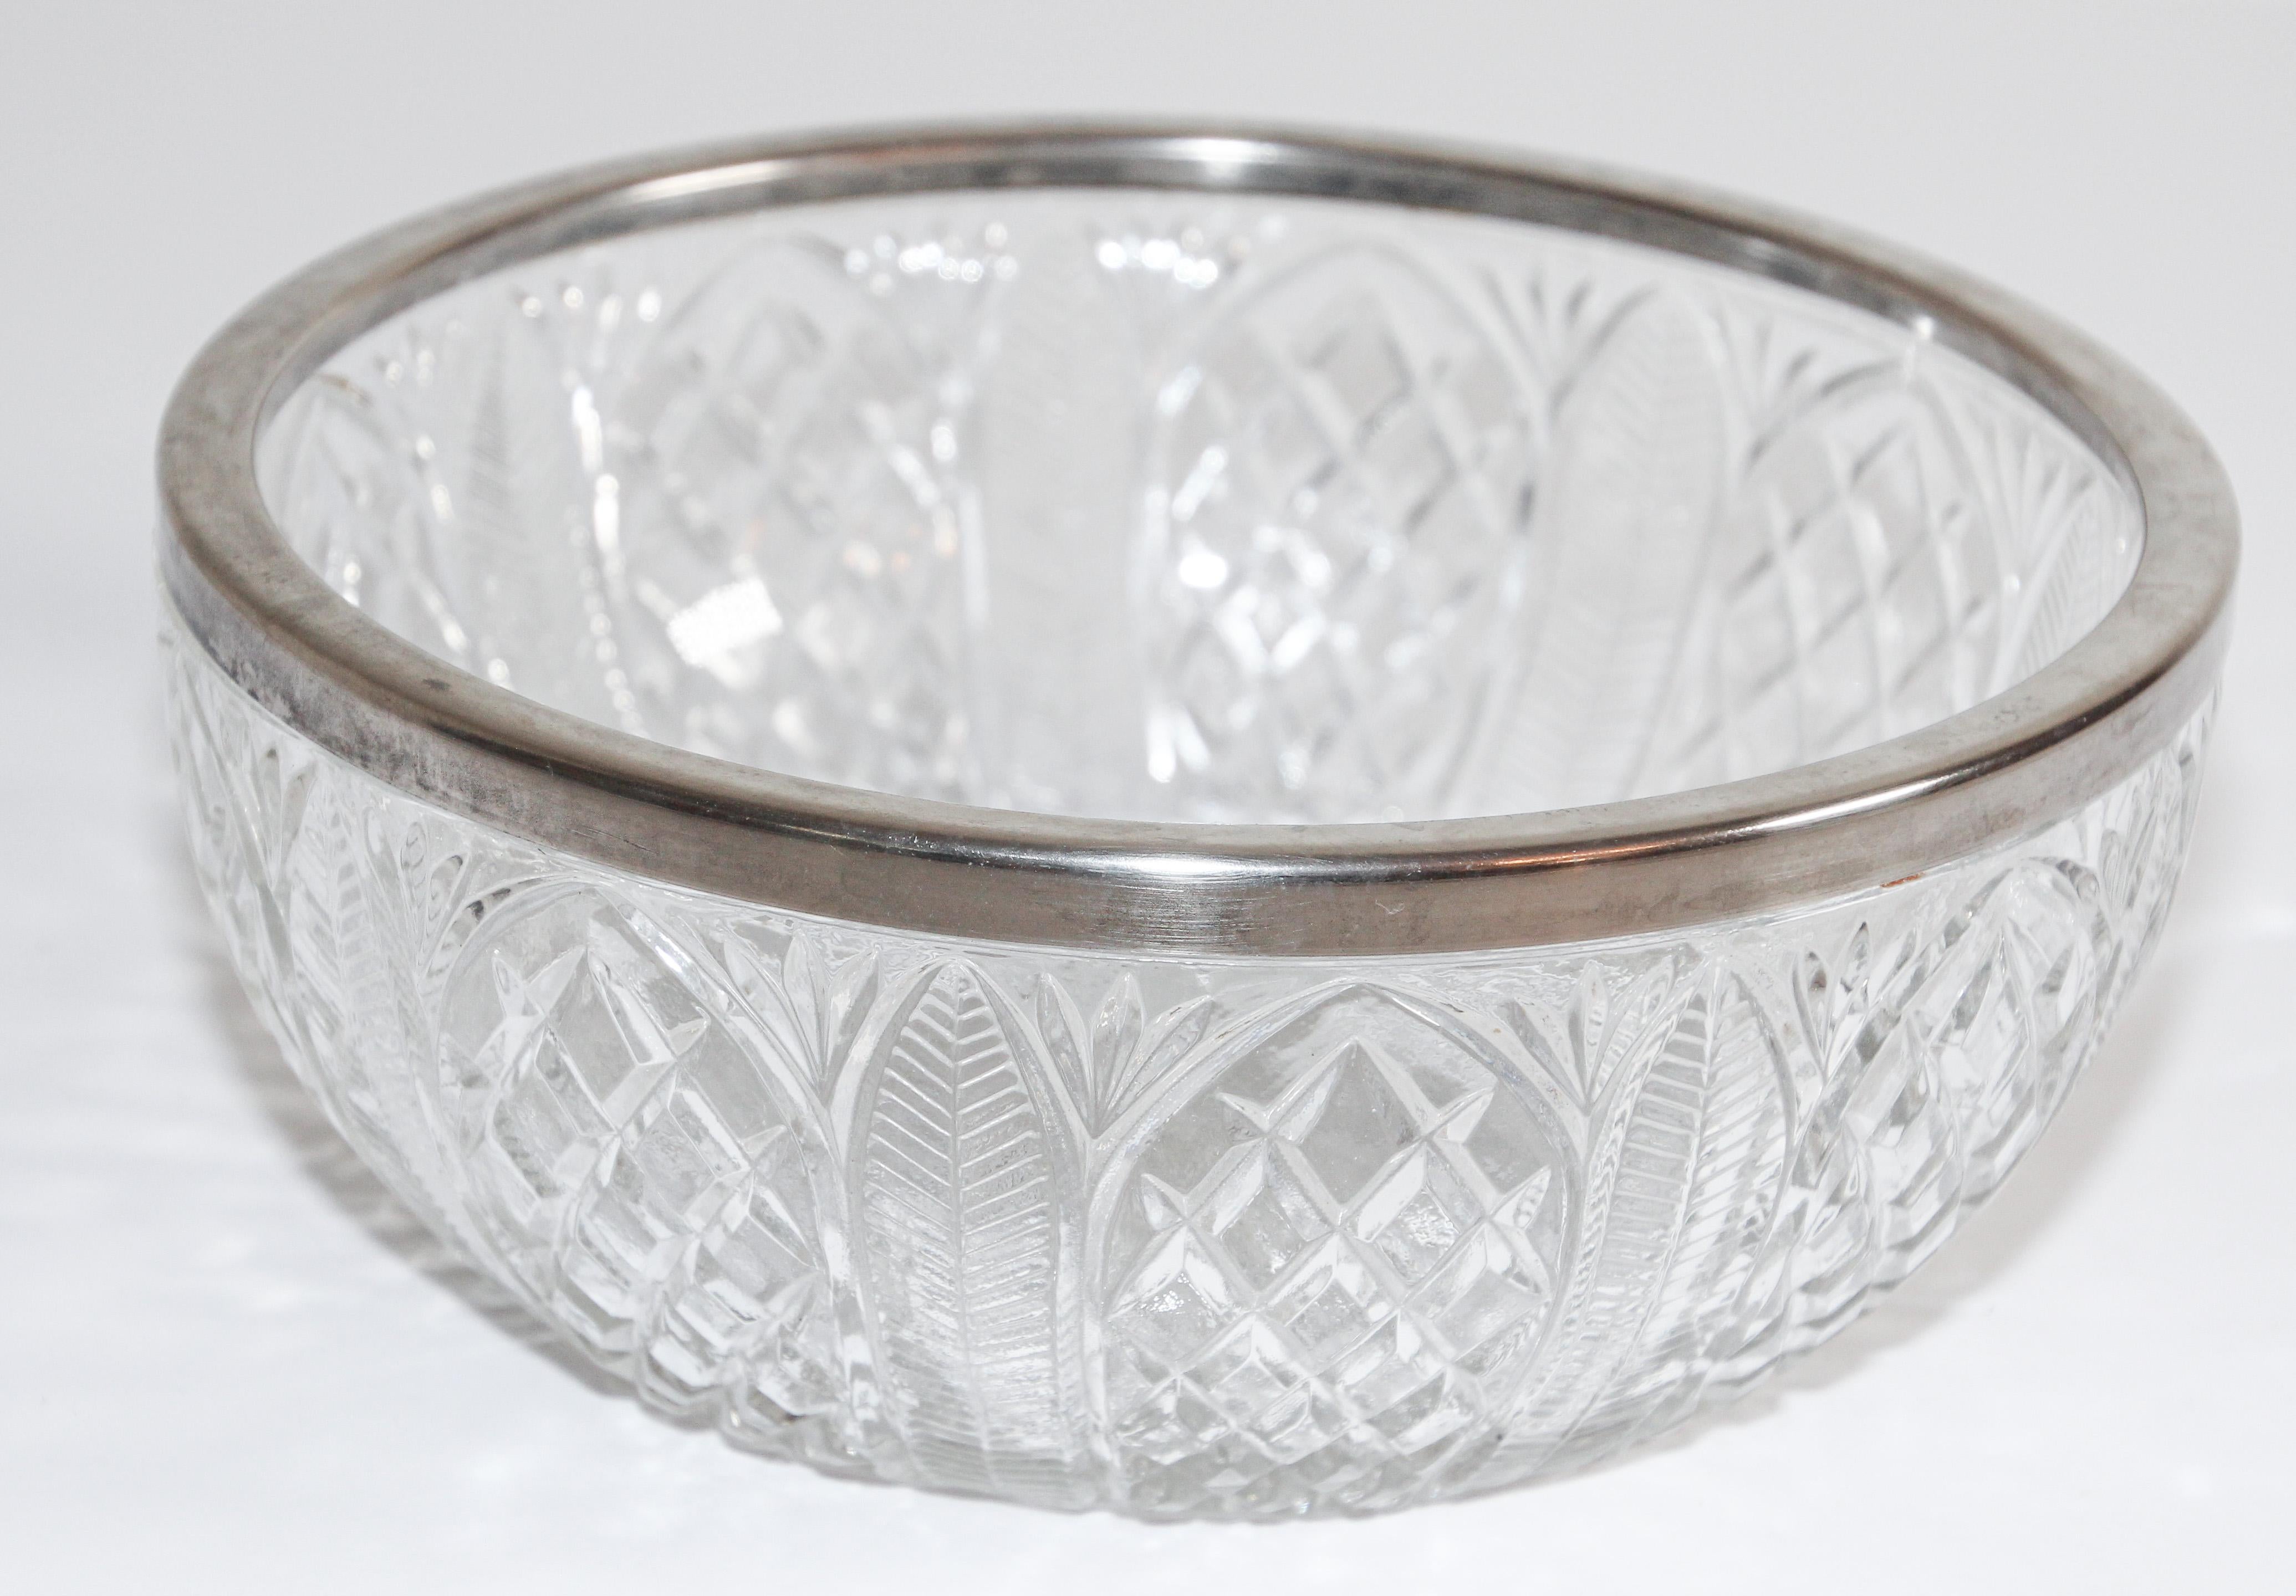 Vintage large heavy crystal bowl with silver plated rim produced by Raimond, England.
Incised on the rim “Made in England” (see pictures, the pattern features a beautiful cutout starburst pattern. The bottom of the bowl is gorgeous and offers the